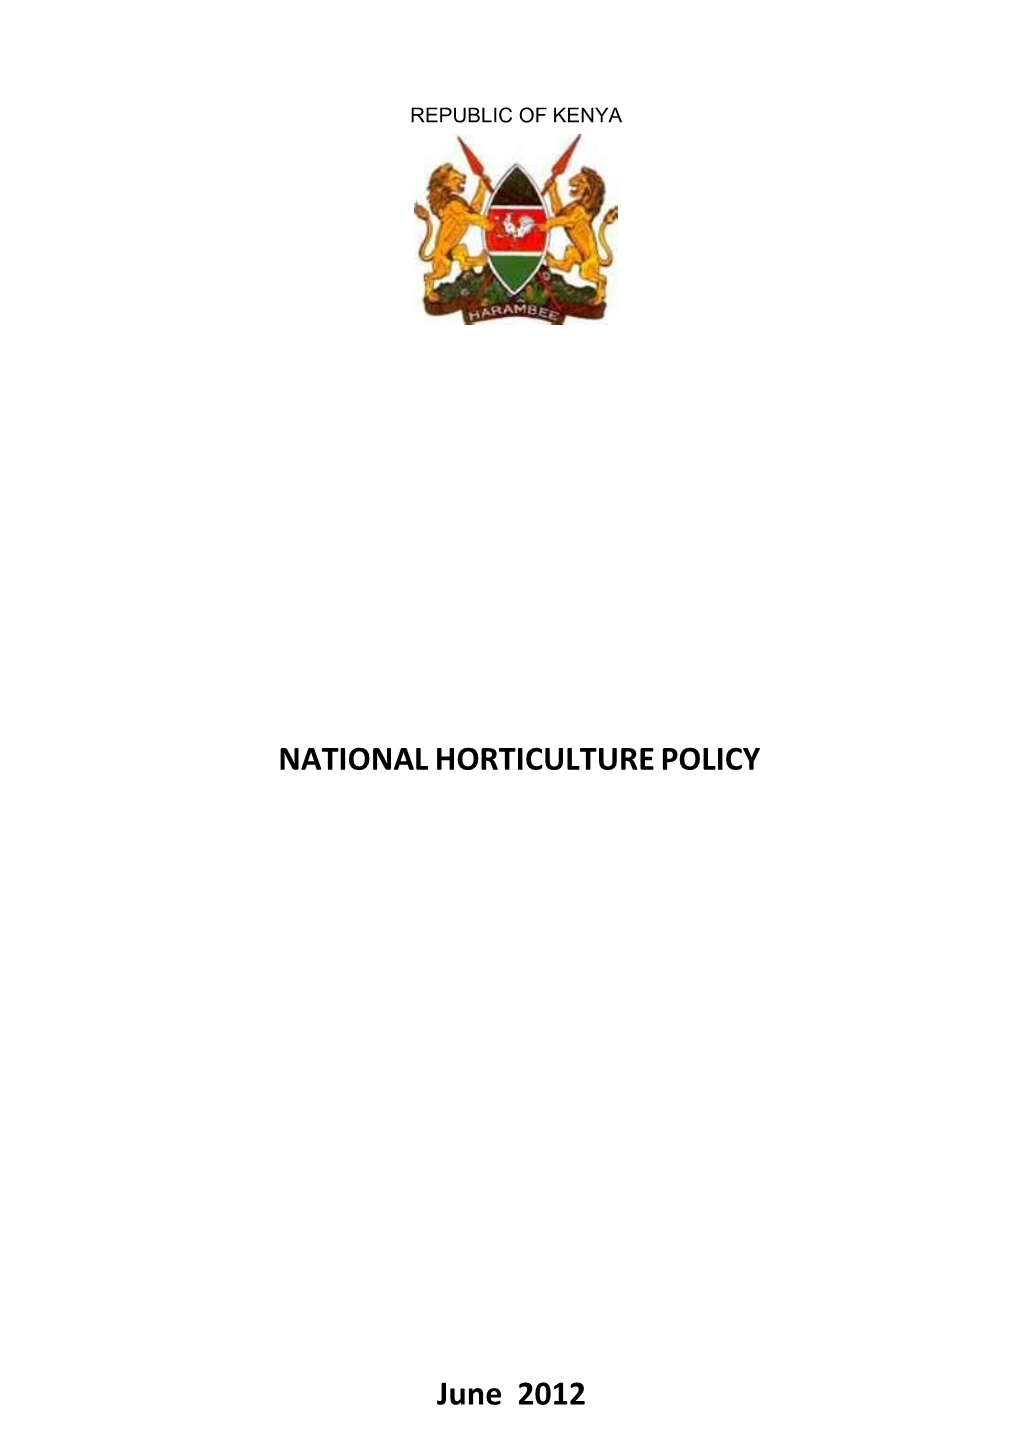 NATIONAL HORTICULTURE POLICY June 2012